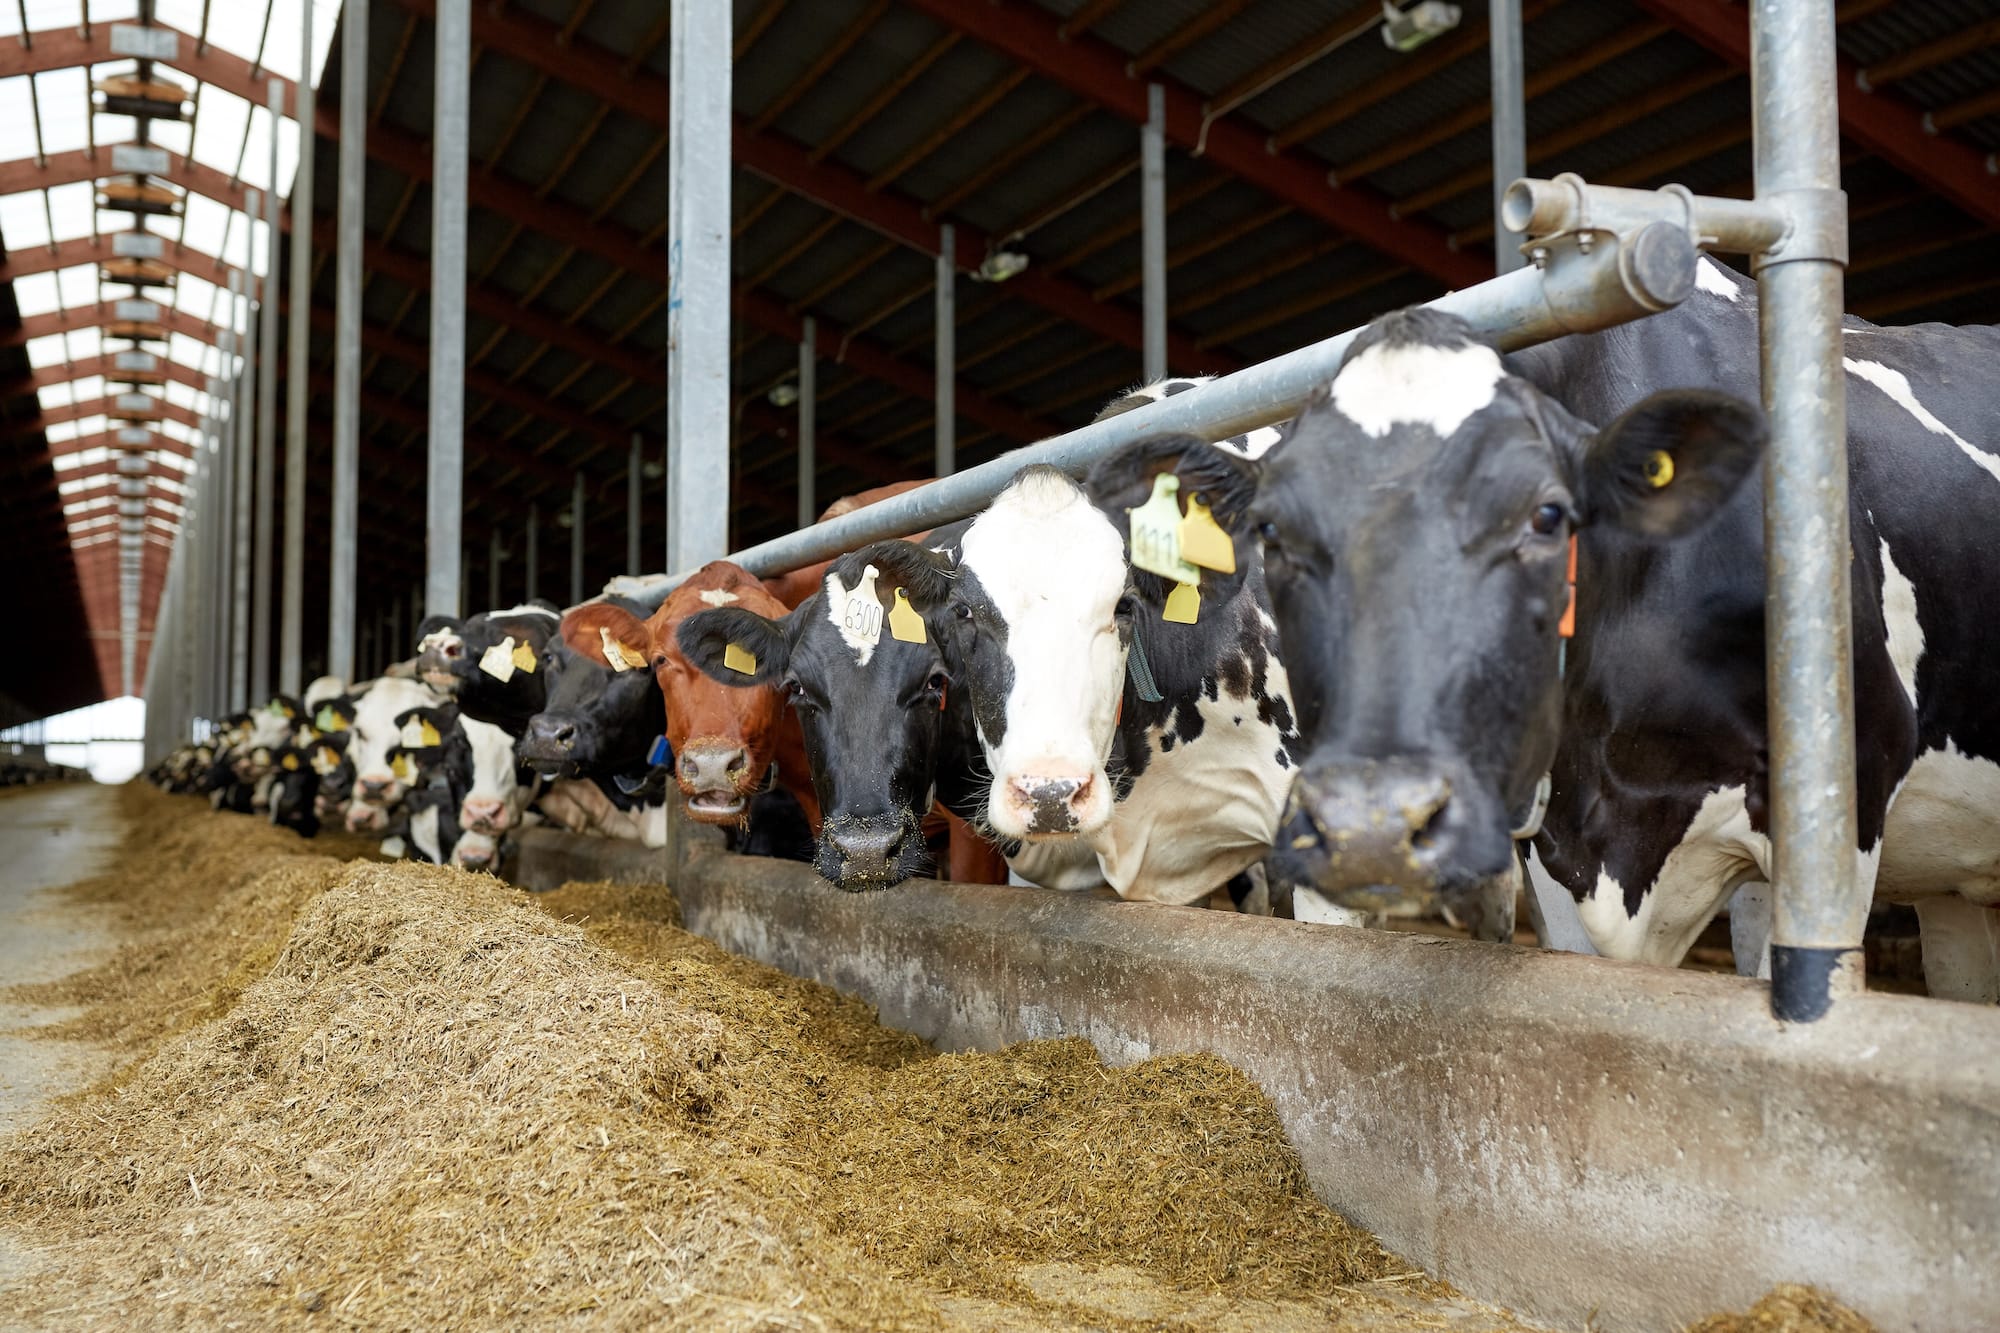 Whether your cows graze on concrete or pasture, it is about managing an efficient feeding system